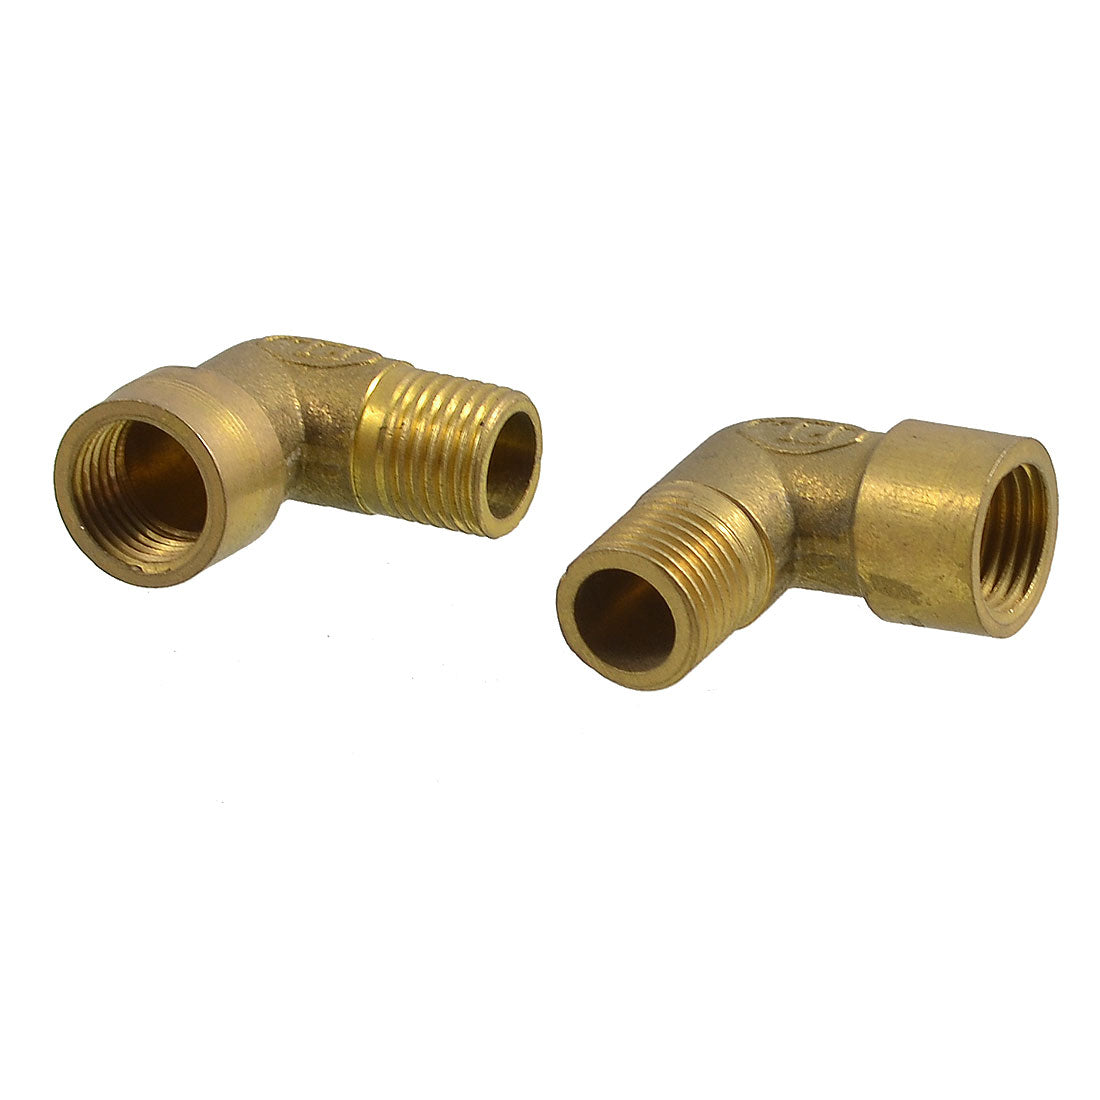 uxcell Uxcell 2 Pcs Brass 1/4" x 1/4" PT Thread Elbow Pipe Fittings Couplers